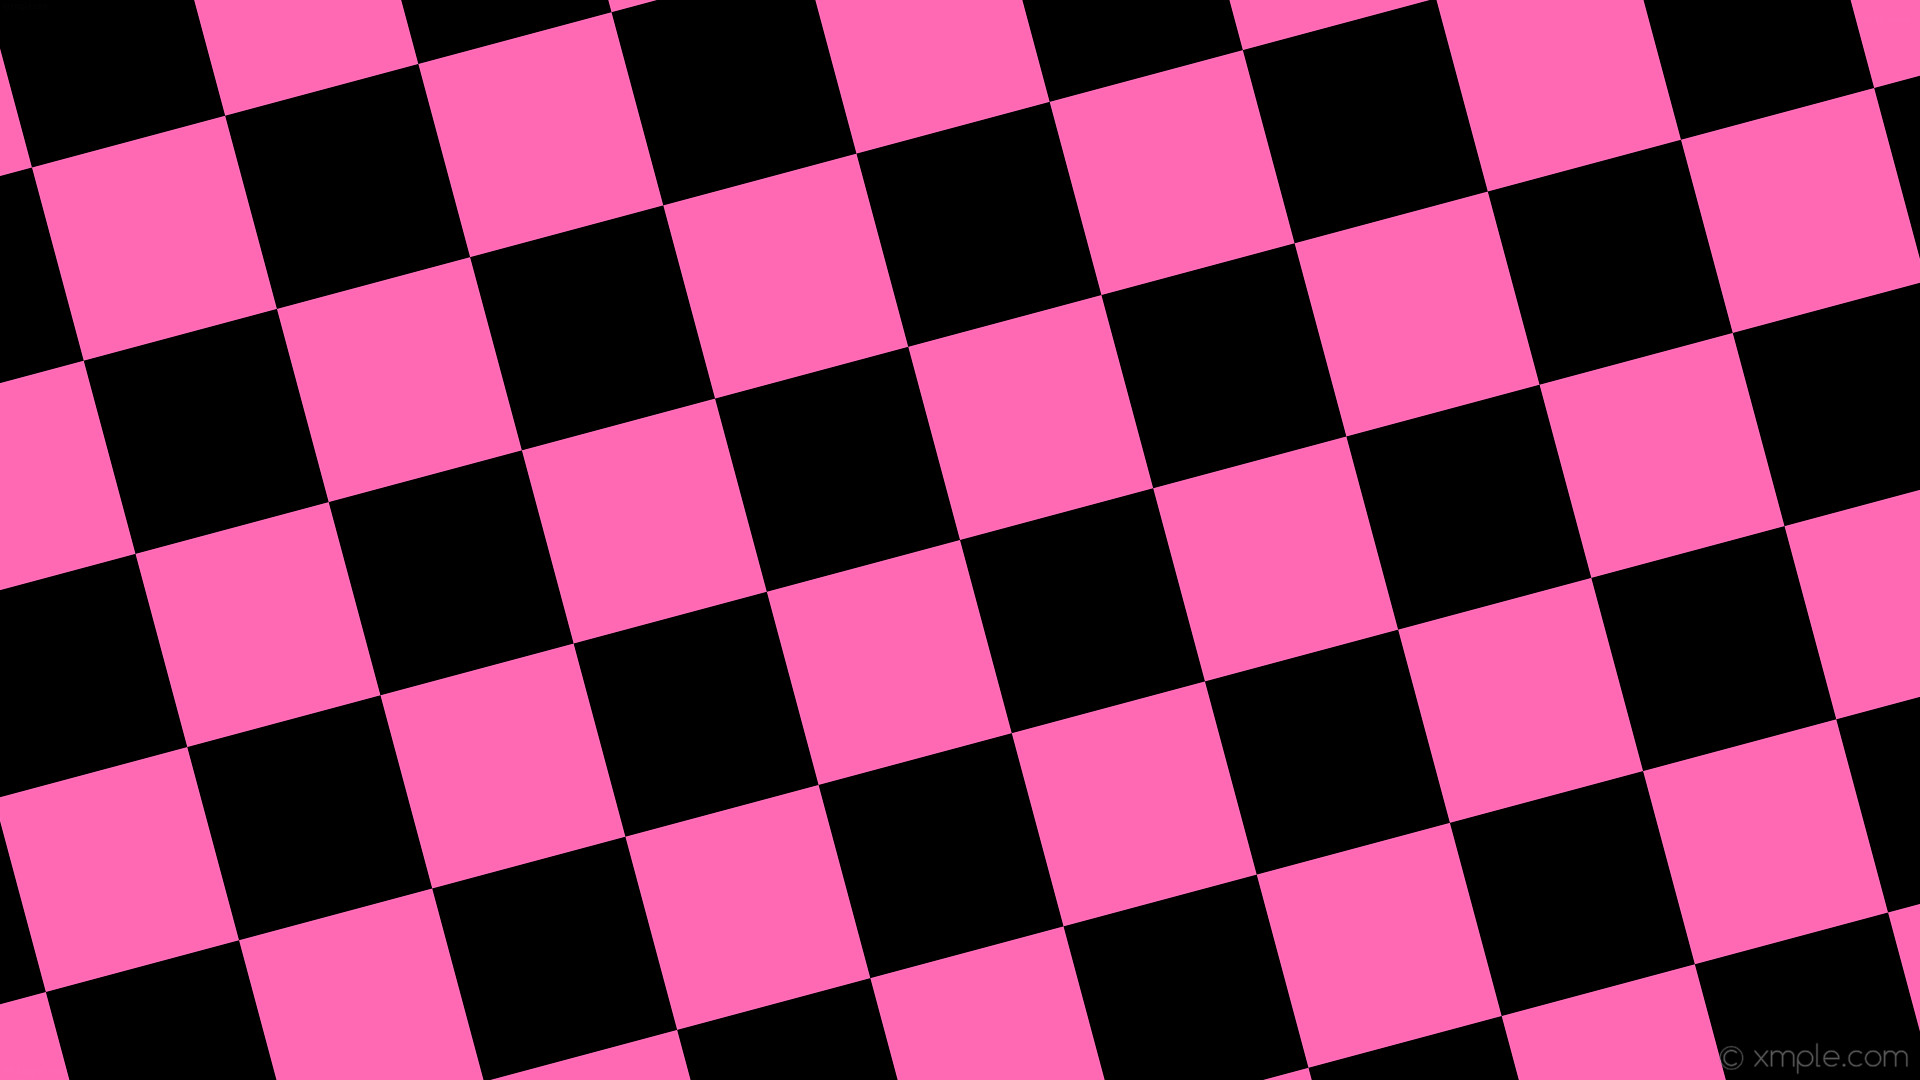 1920x1080 Black and Pink Wallpaper